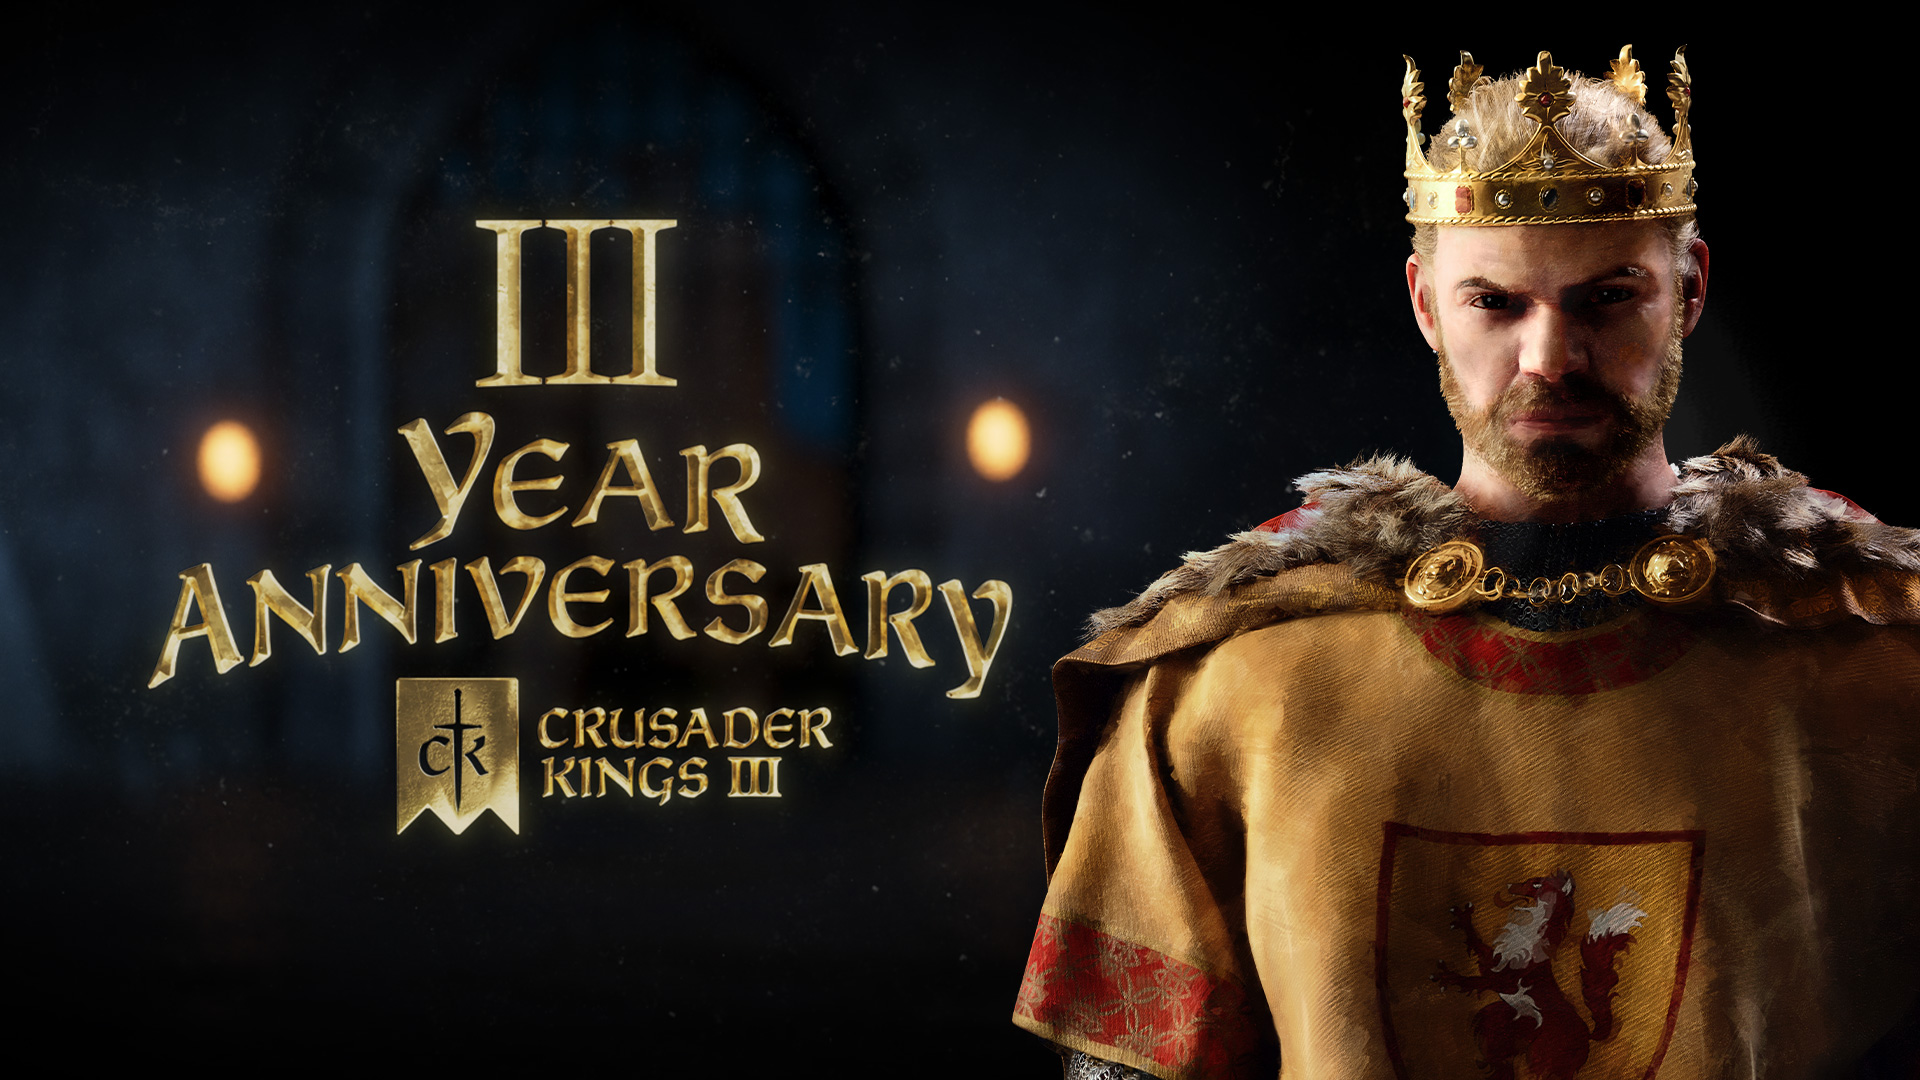 HRE clothing pack shown from Microsoft store : r/CrusaderKings